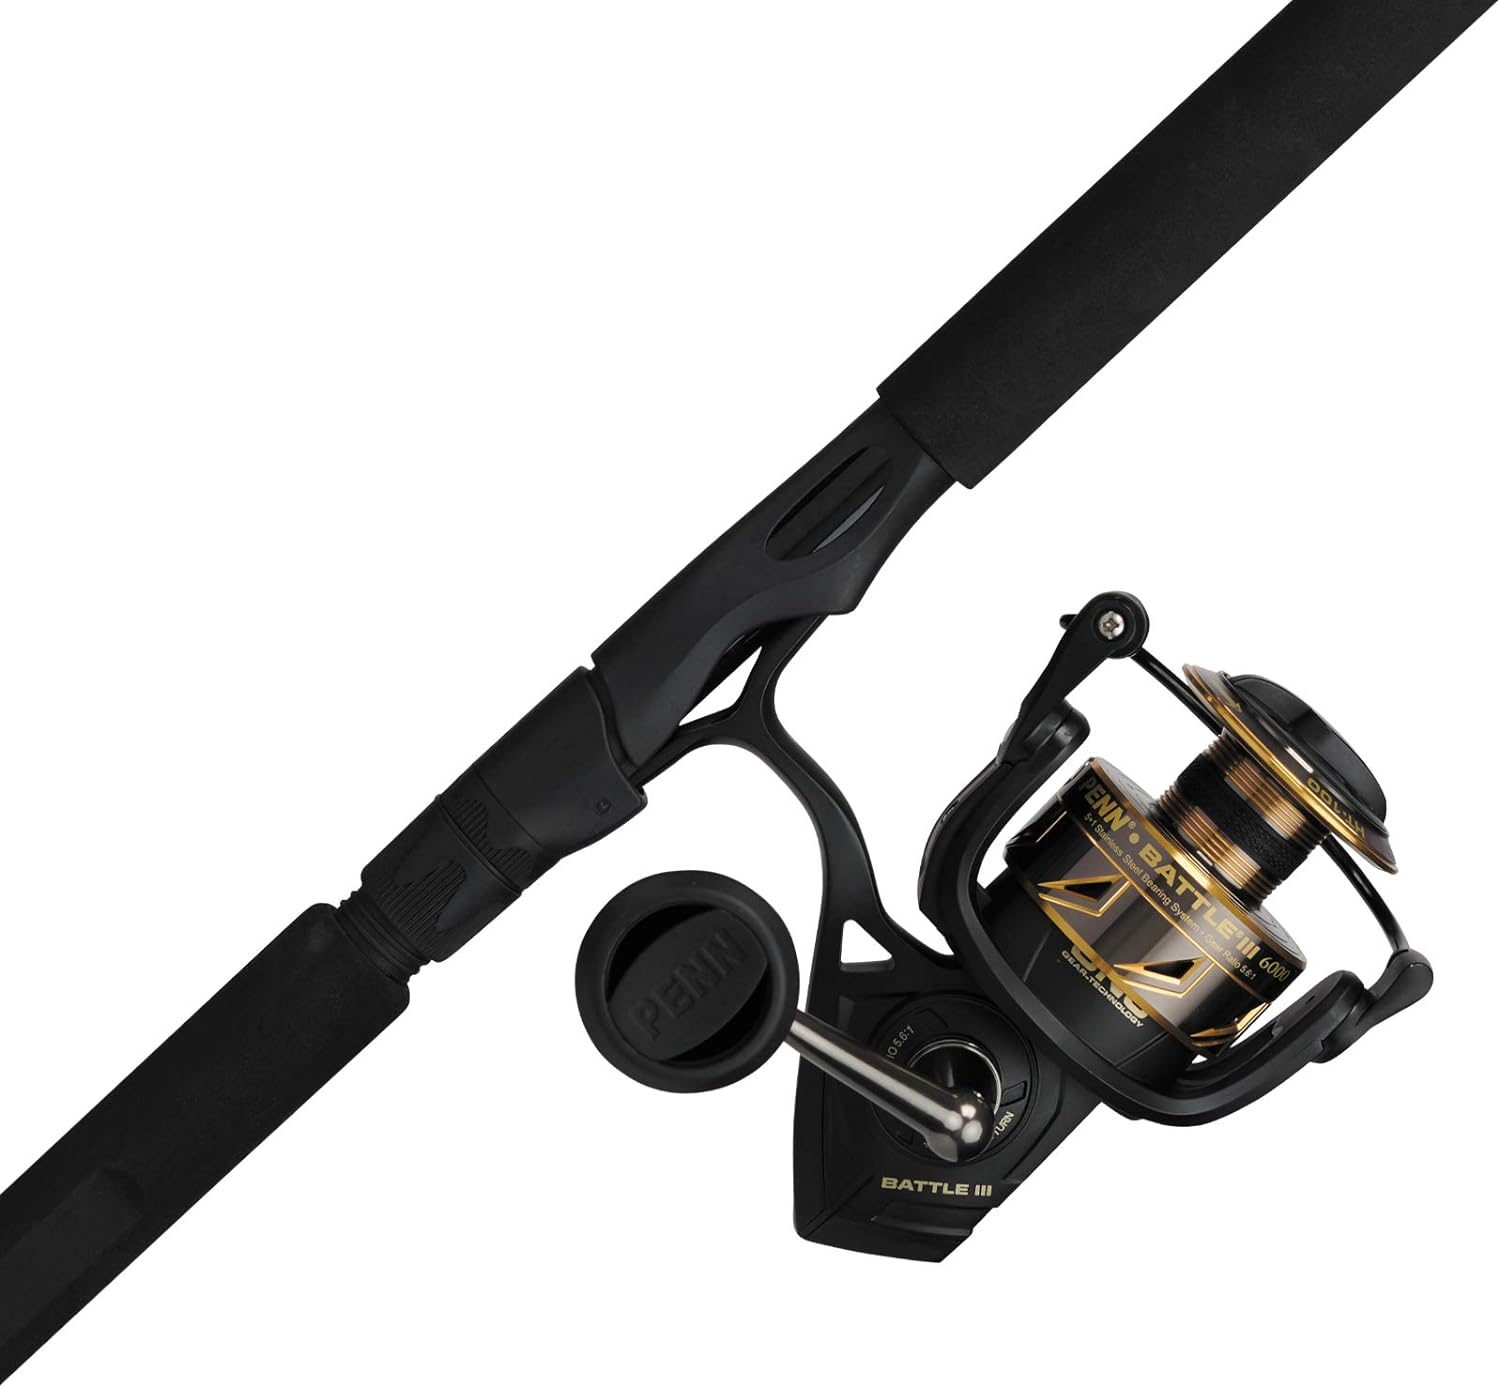 TOP 5 BEST SURF FISHING ROD AND REEL COMBOS REVIEWED